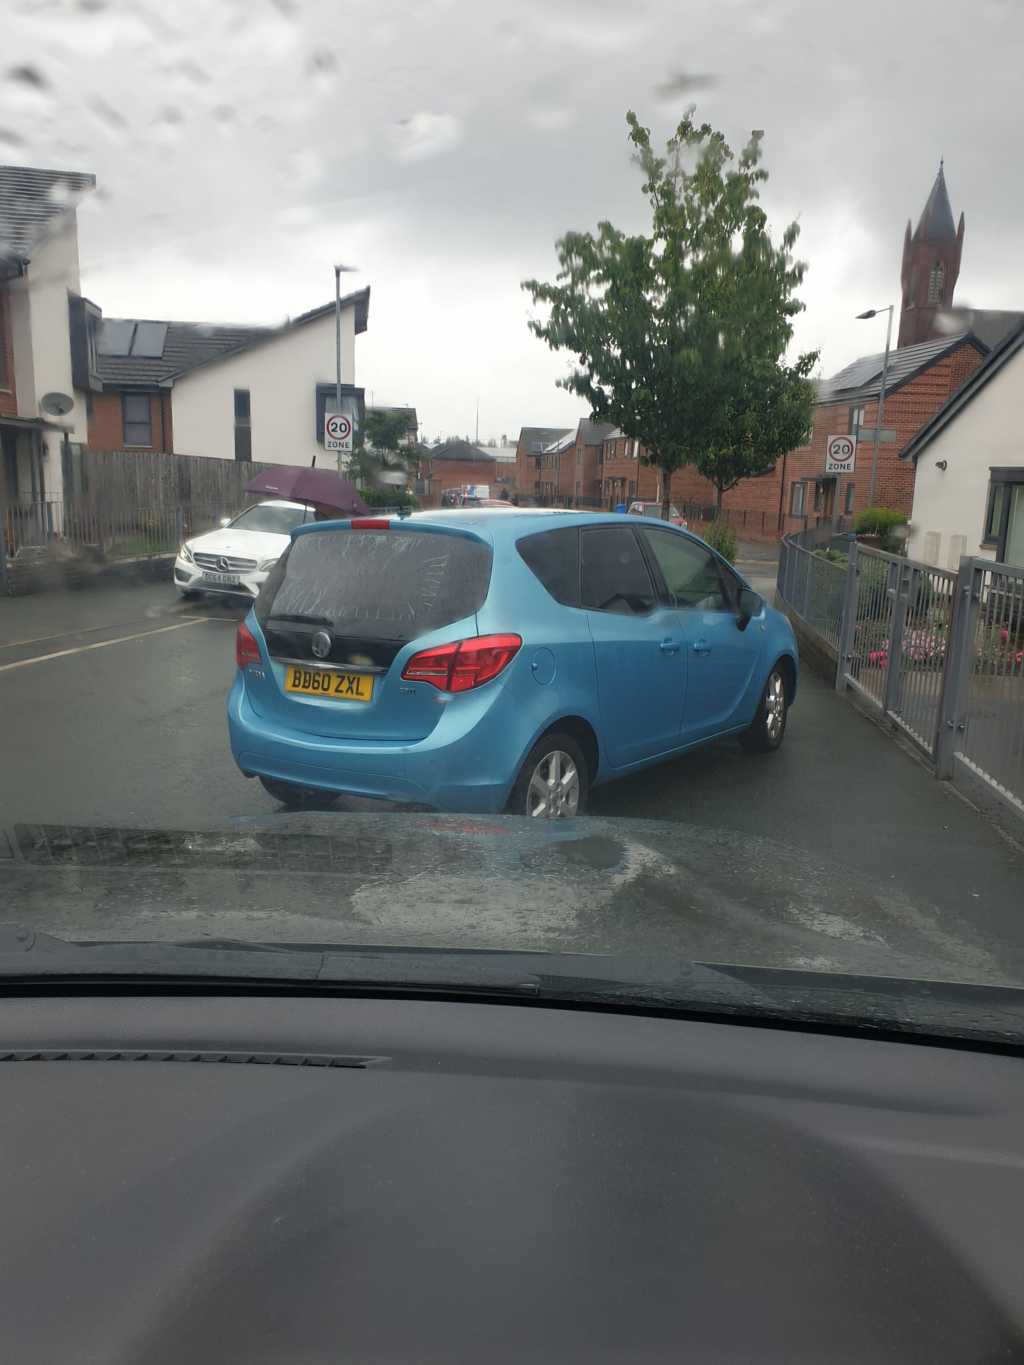 BD60 ZXL displaying Inconsiderate Parking